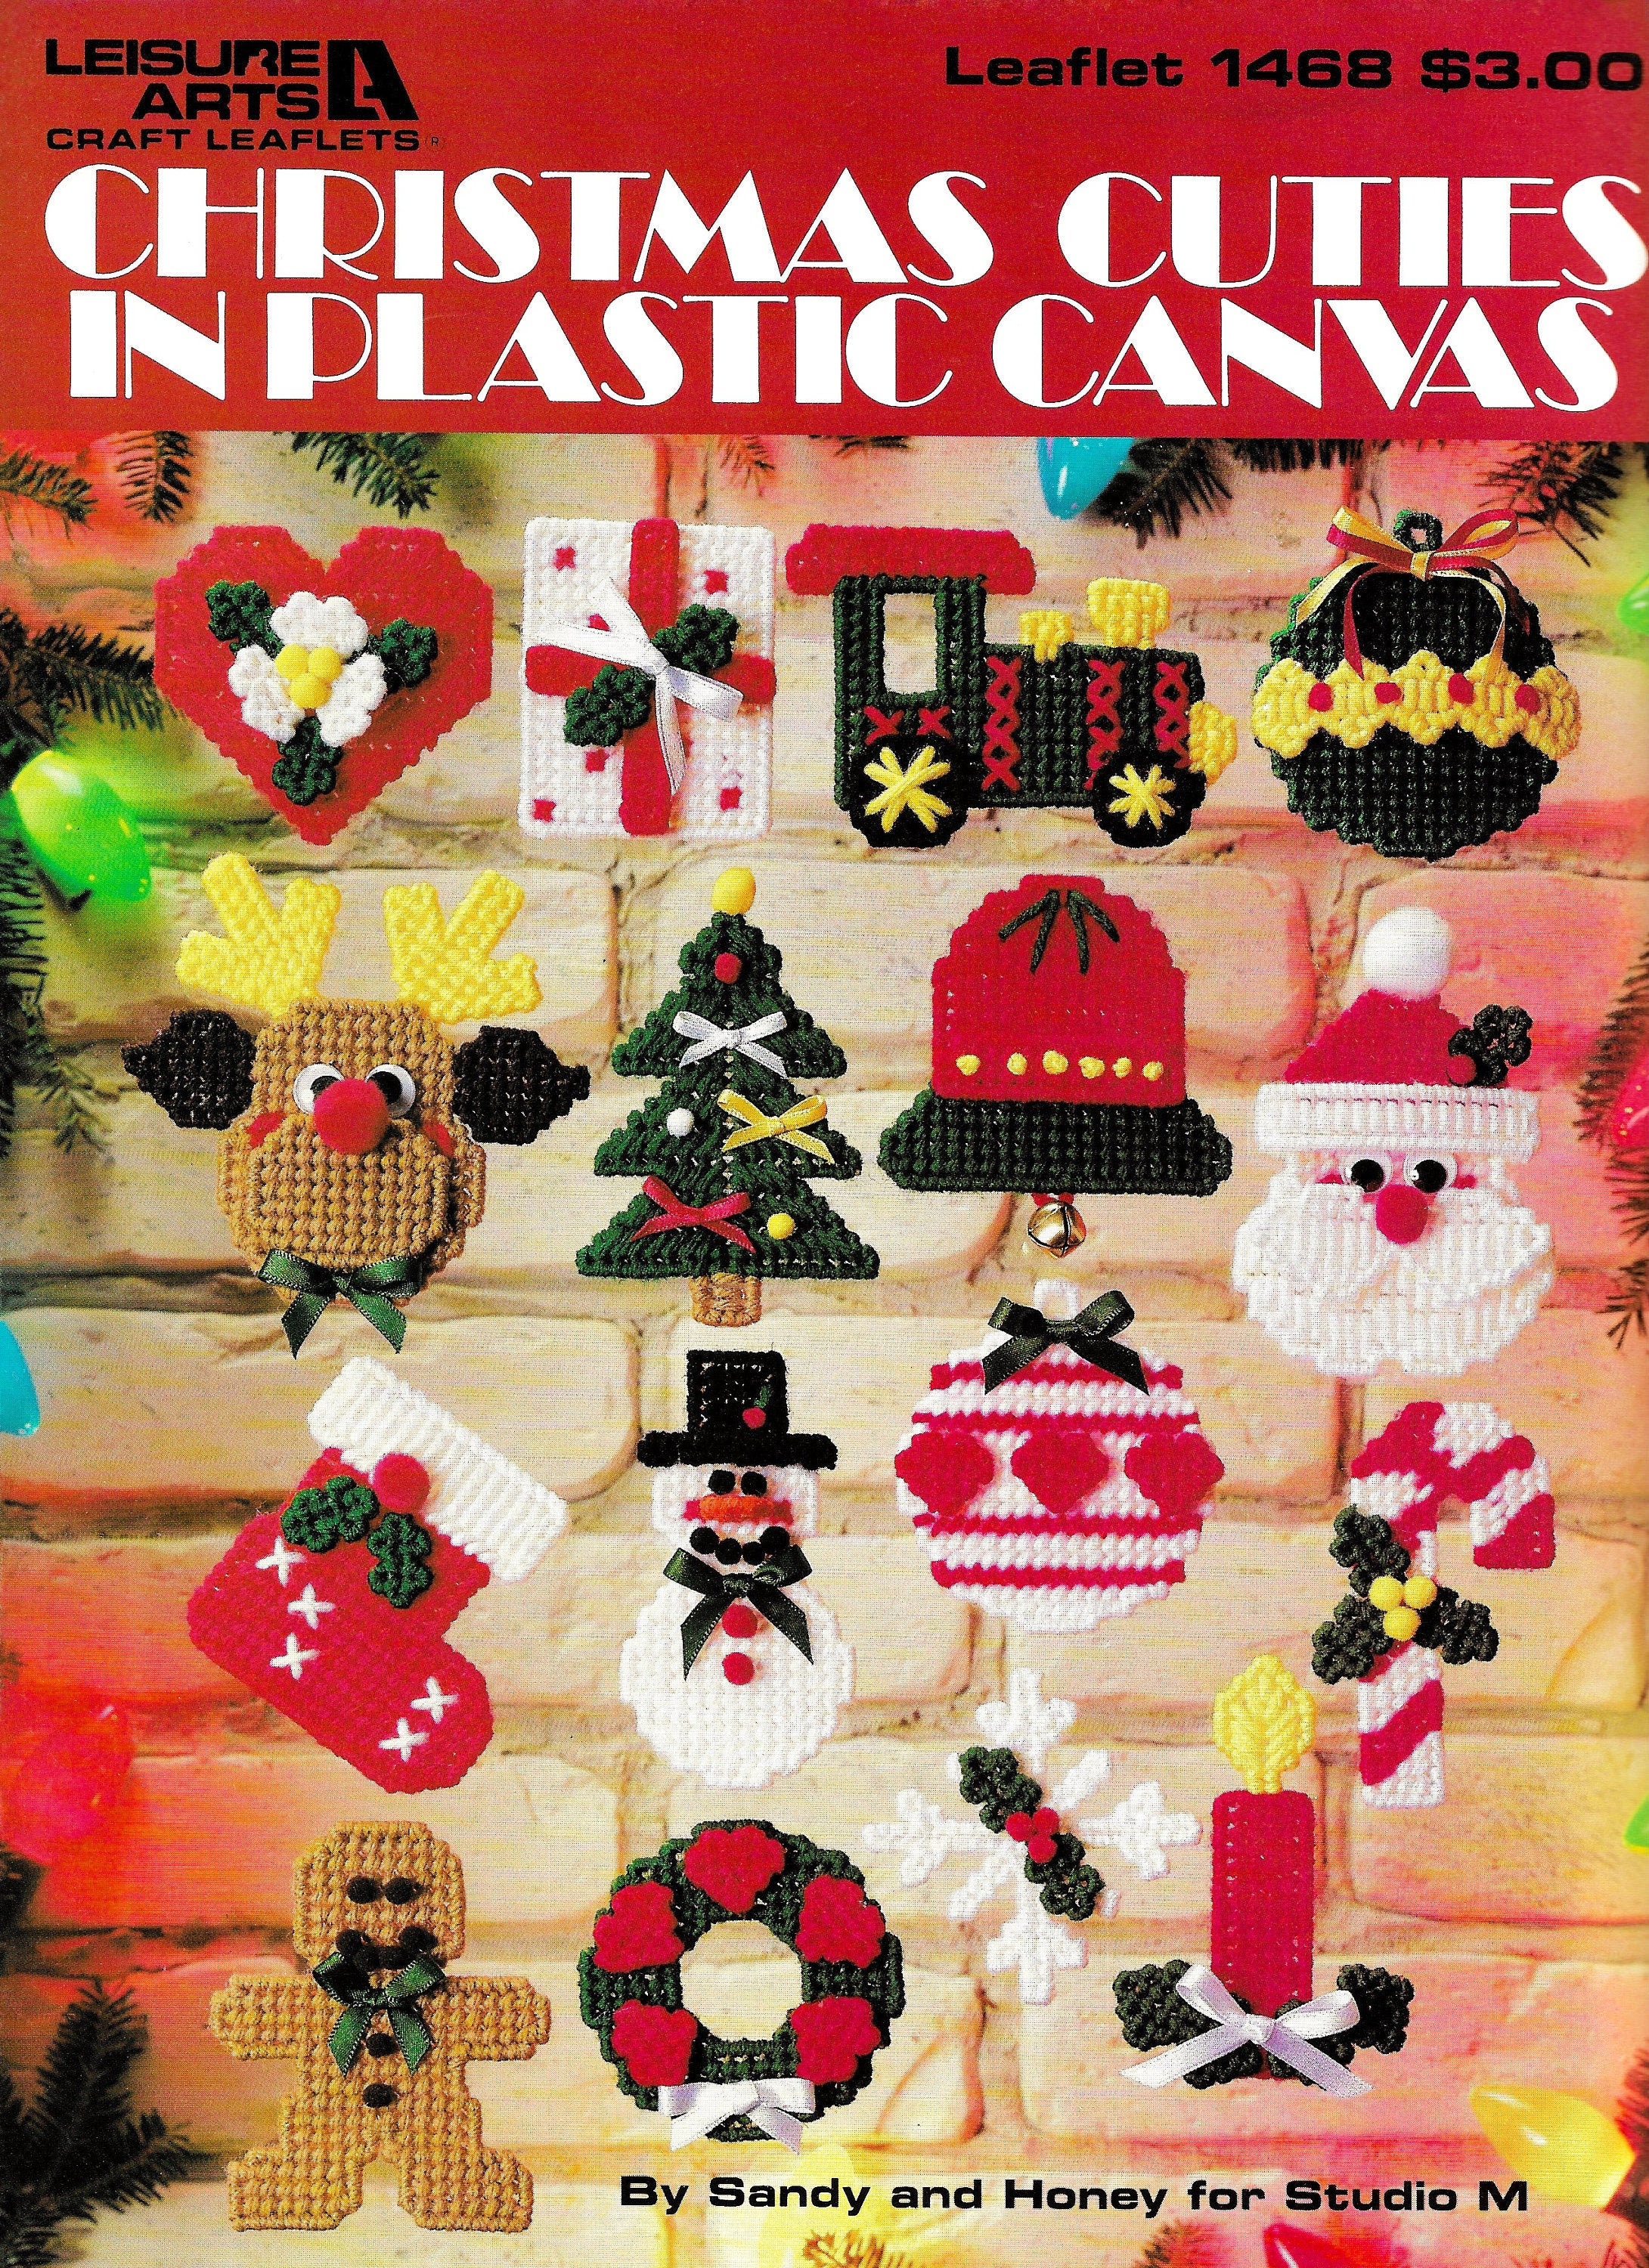  Leisure Arts Just Gift It! 65 Plastic Canvas Book - plastic  canvas books and patterns for gift giving, decoration, Christmas decor - plastic  canvas patterns